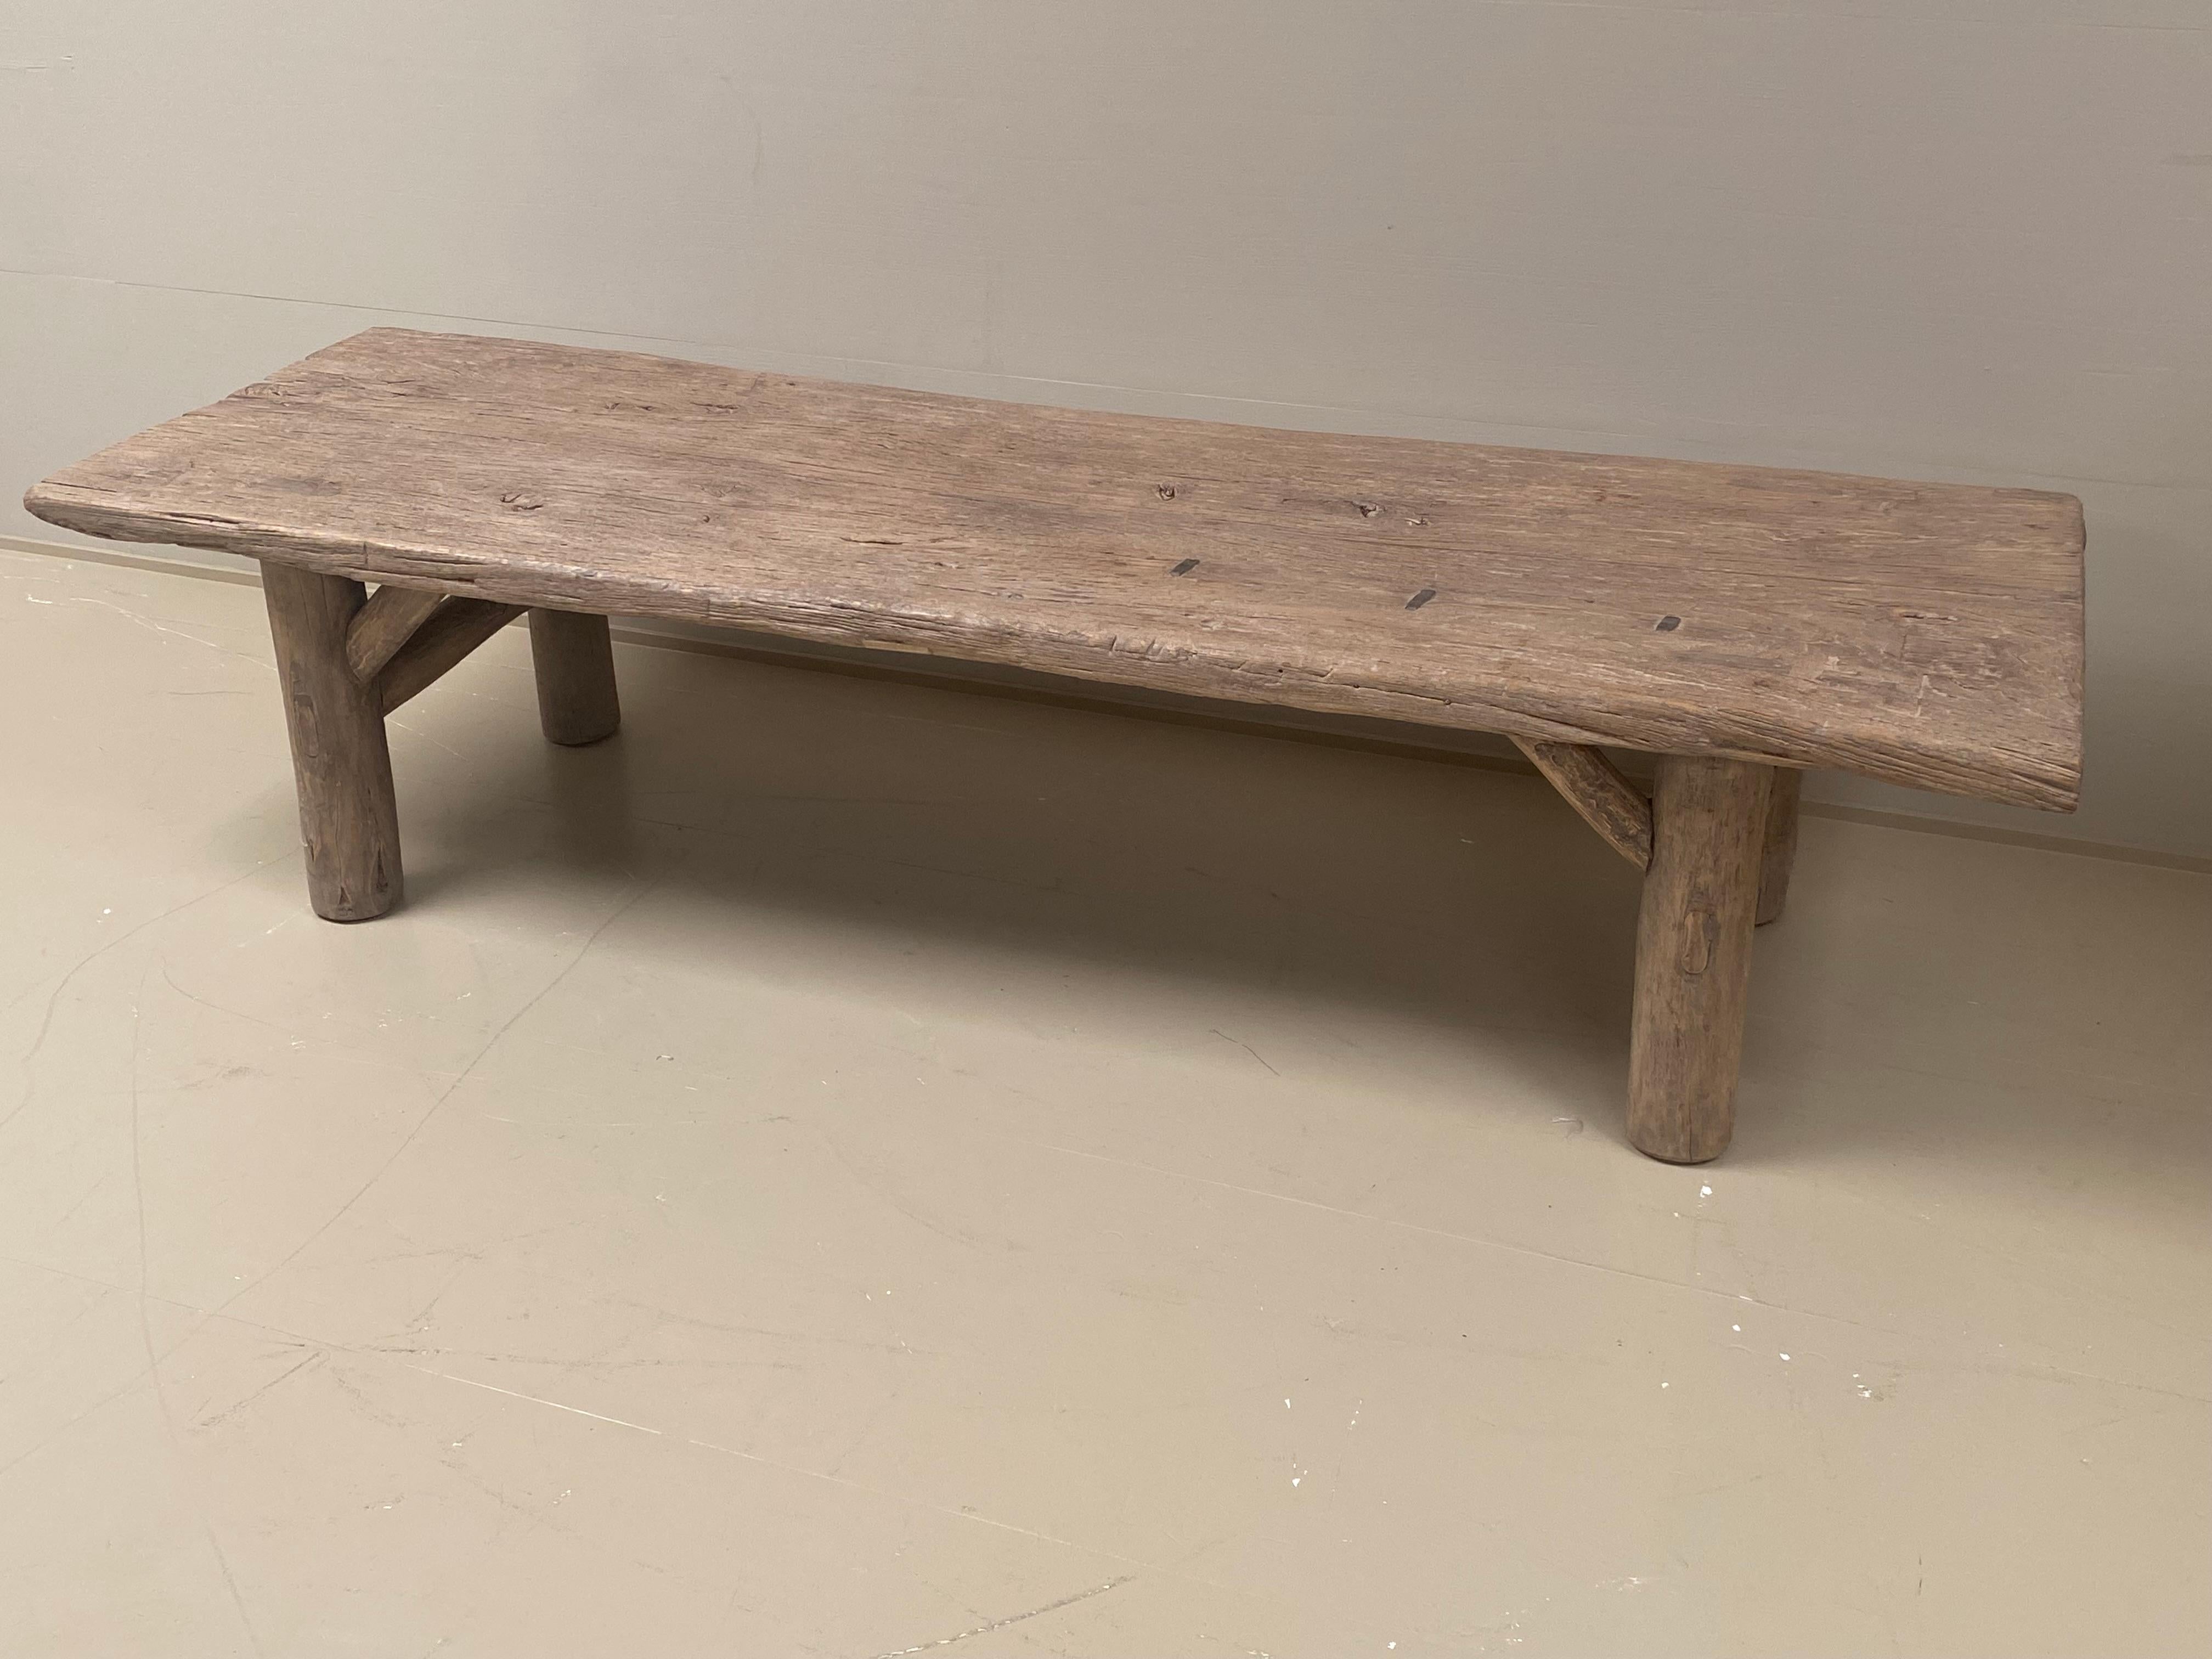 Brutalist French coffeetable in a bleached elm wood,1960 ties,
the wood has a warm and worn finish and a great color,
the top has also a few metal old restorations,
the base is made of round wooden legs and stretchers,
beautiful piece of